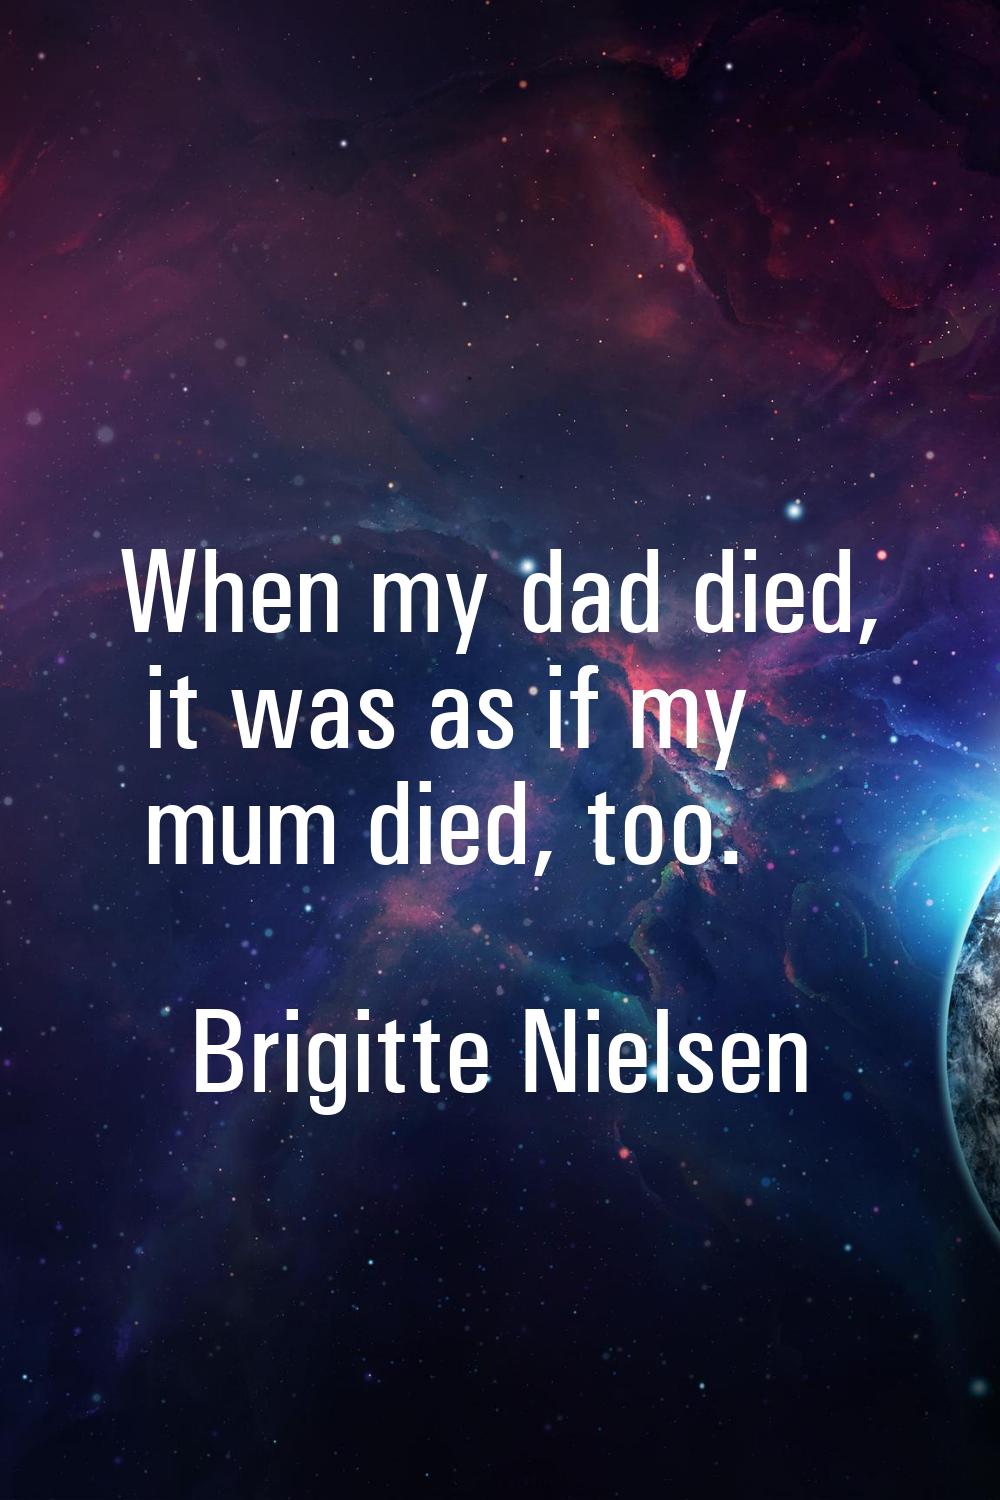 When my dad died, it was as if my mum died, too.